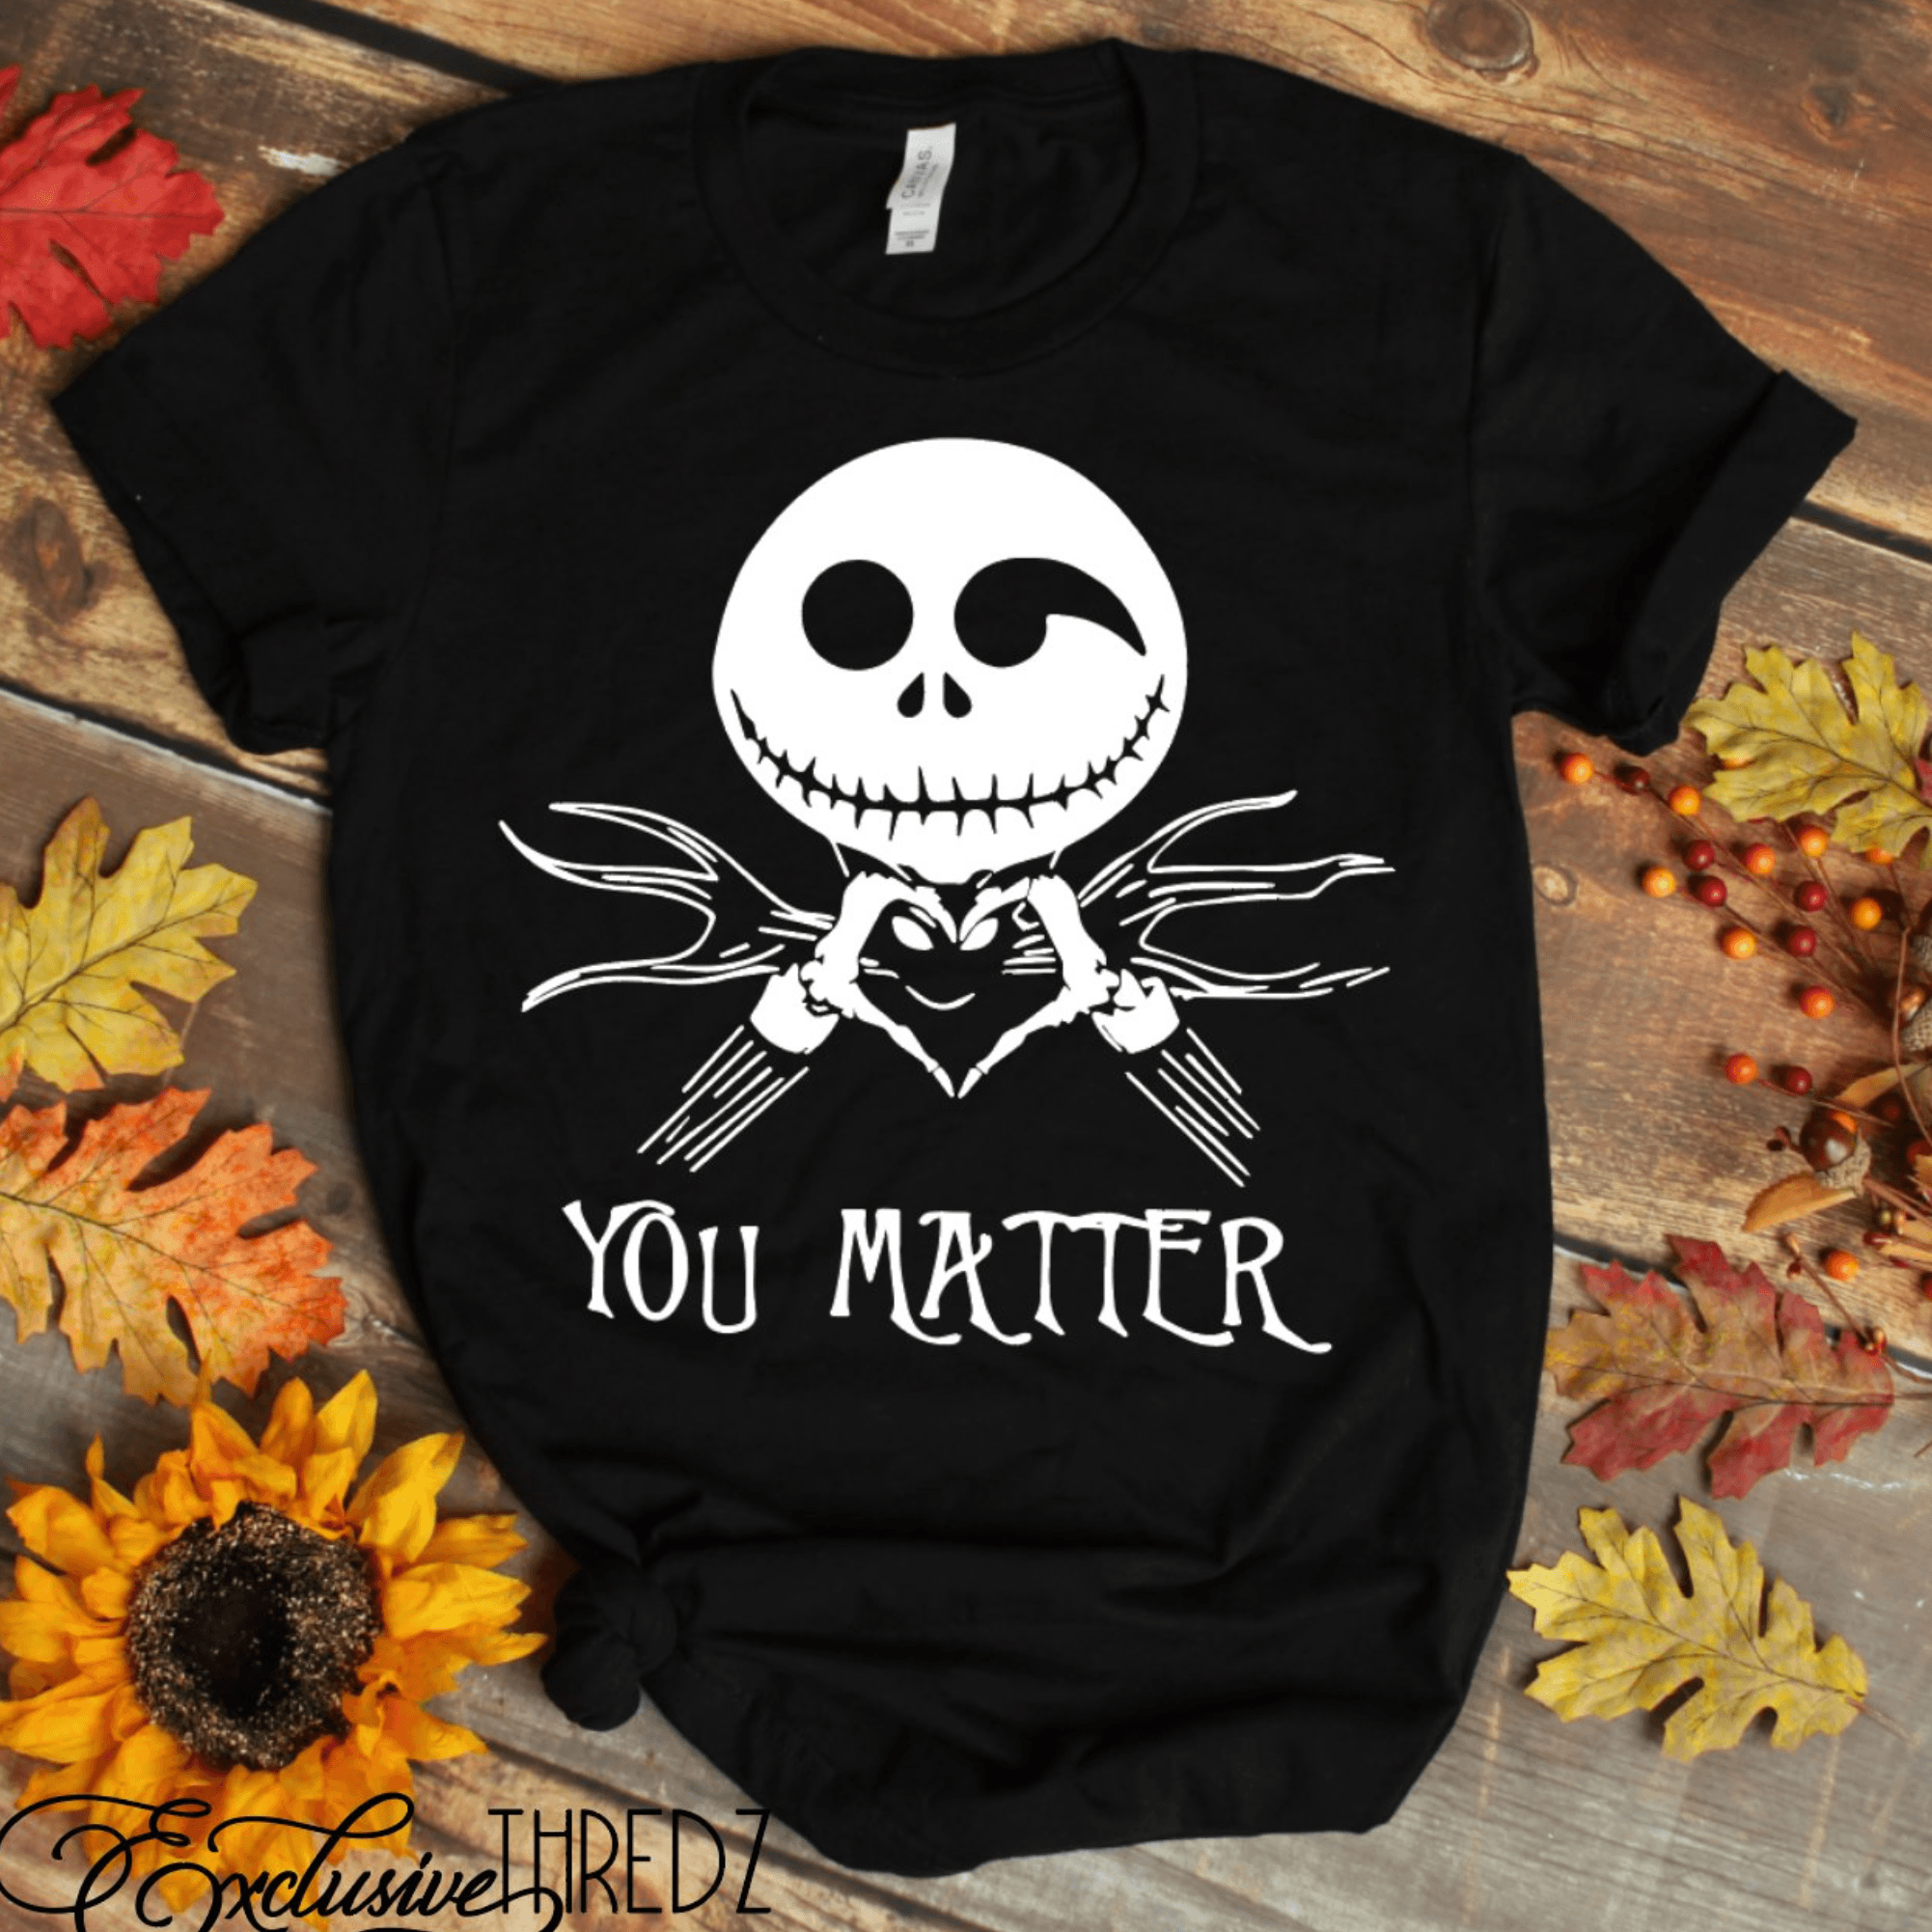 YOU MATTER - Signastyle Boutique